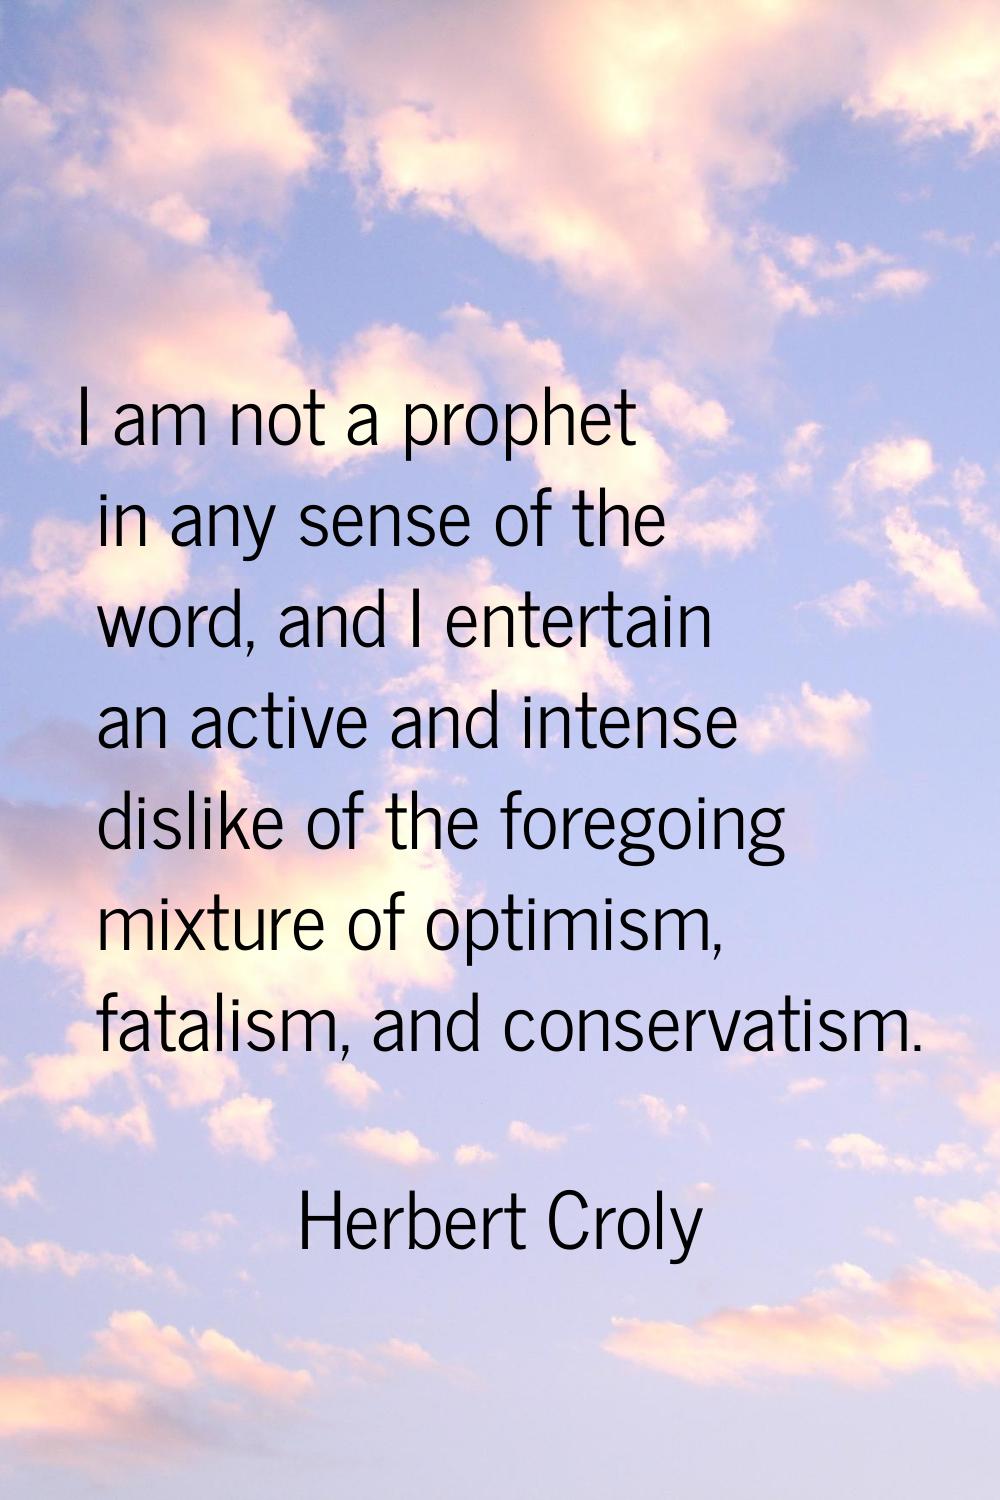 I am not a prophet in any sense of the word, and I entertain an active and intense dislike of the f